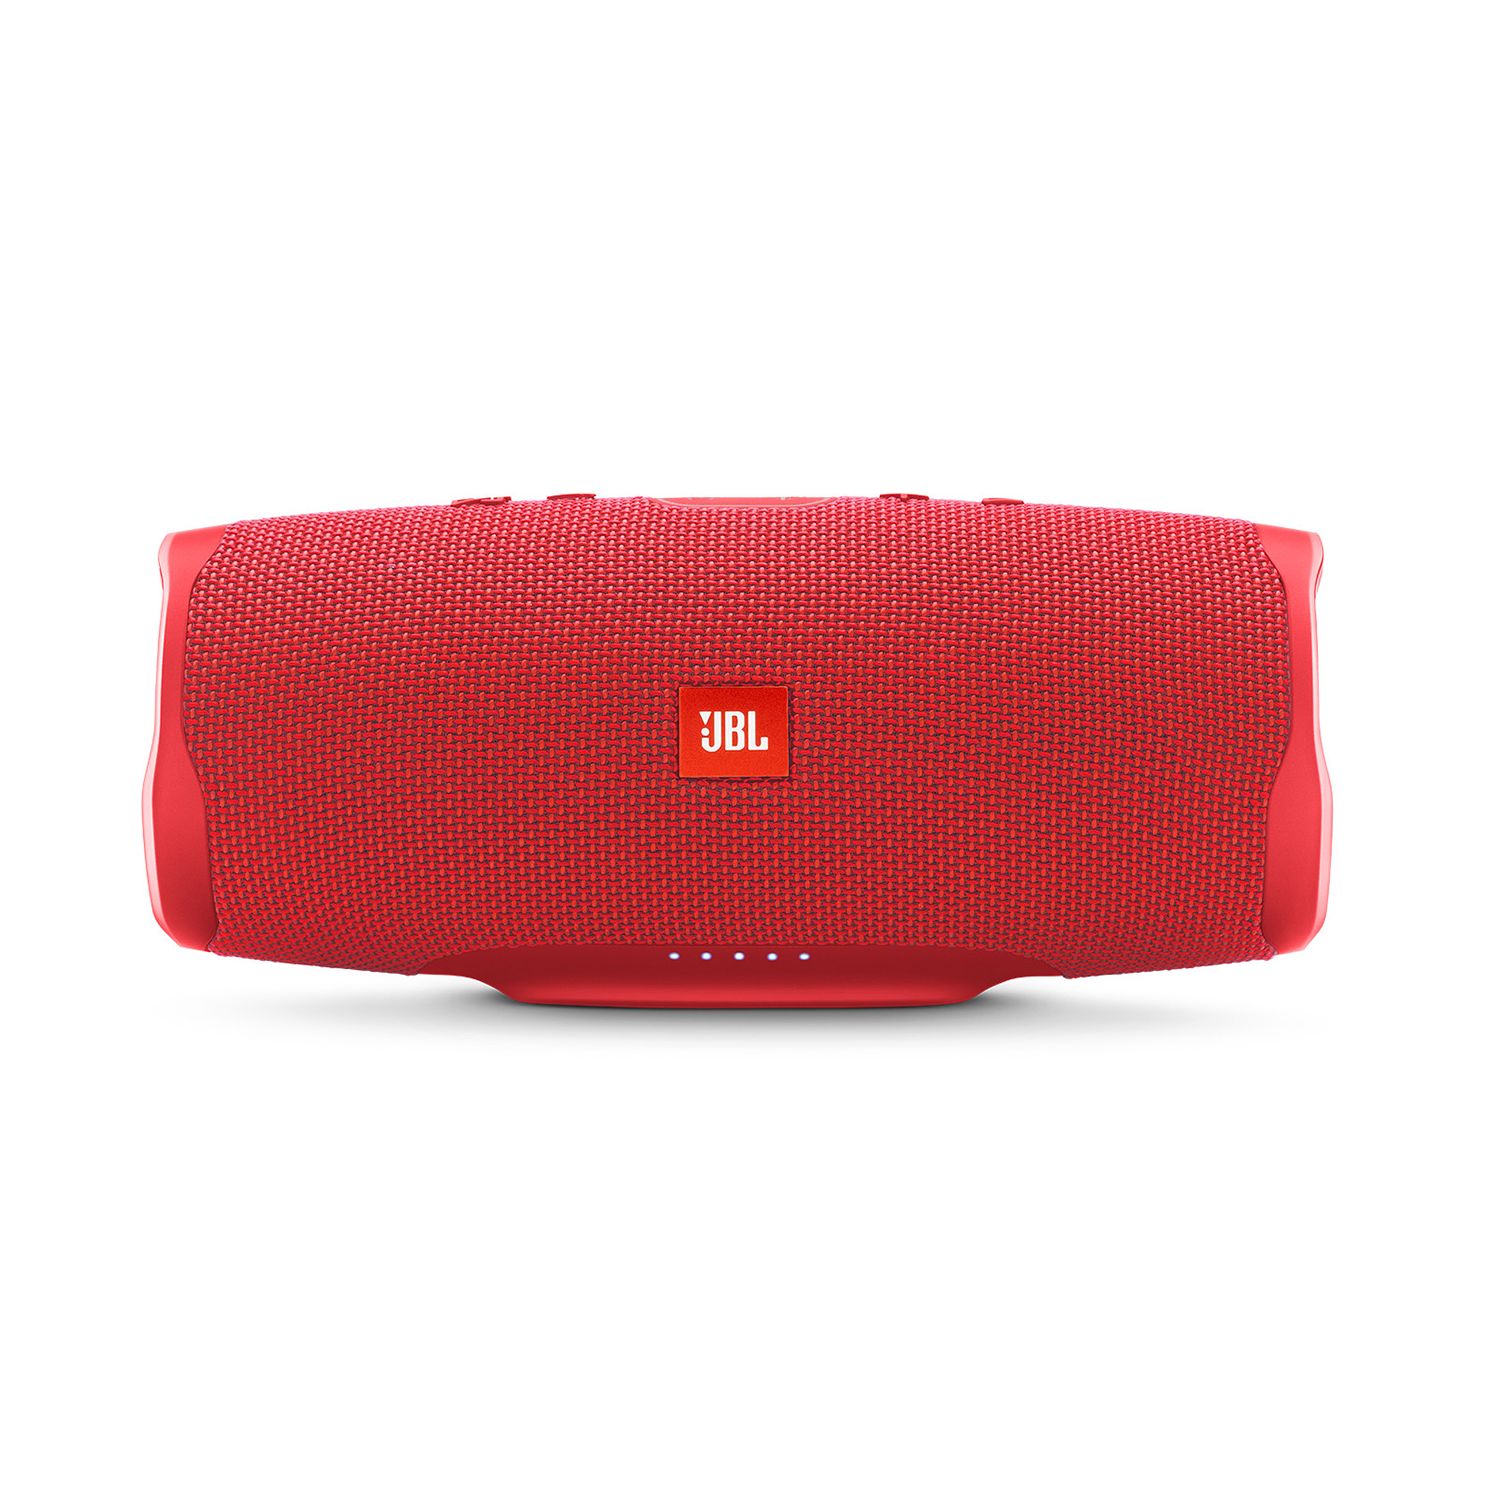 jbl go does not charge